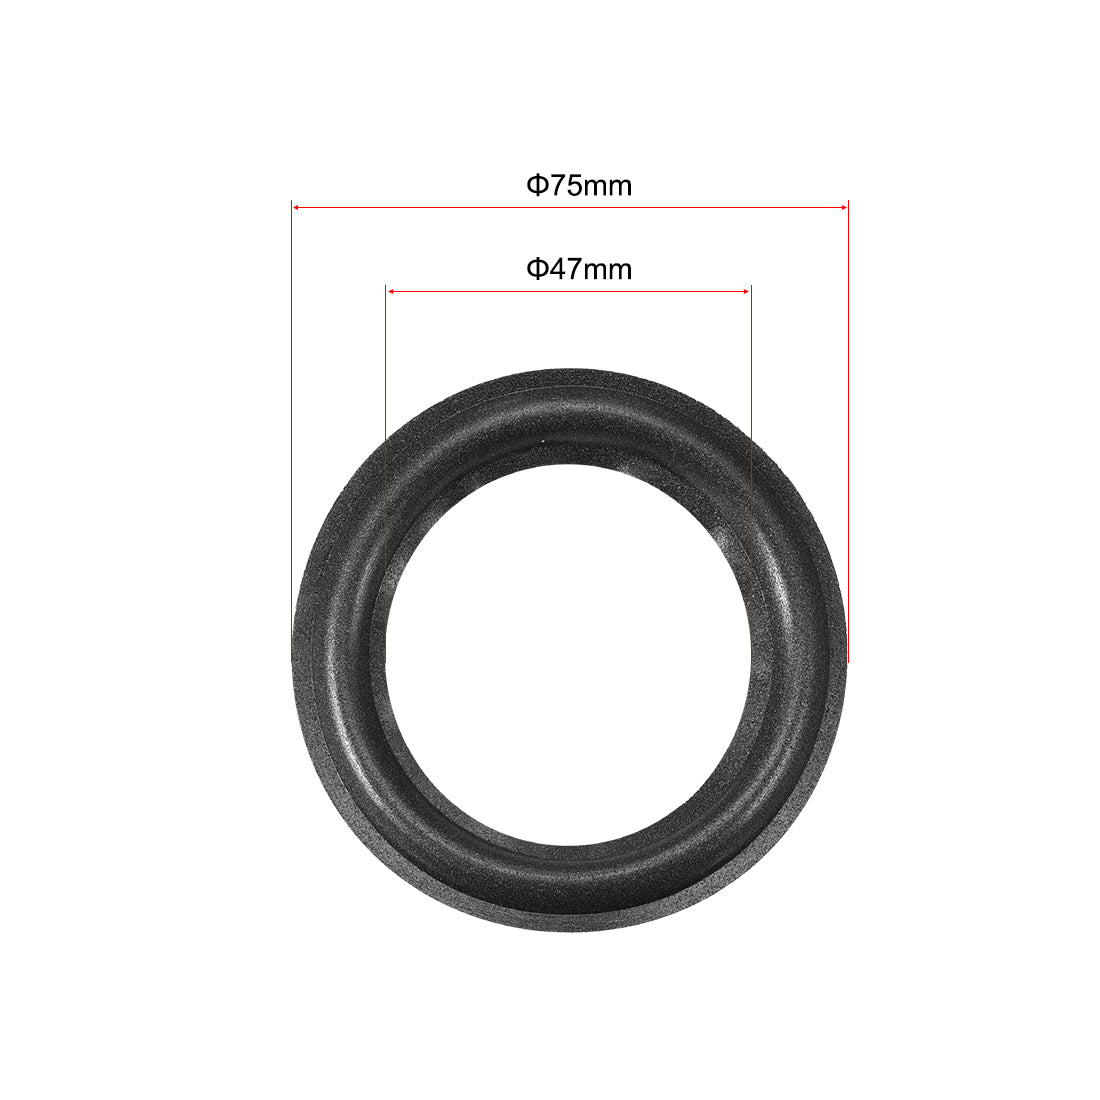 uxcell Uxcell 3"  3 inches Speaker Foam Edge Surround Rings Replacement Parts for Speaker Repair or DIY